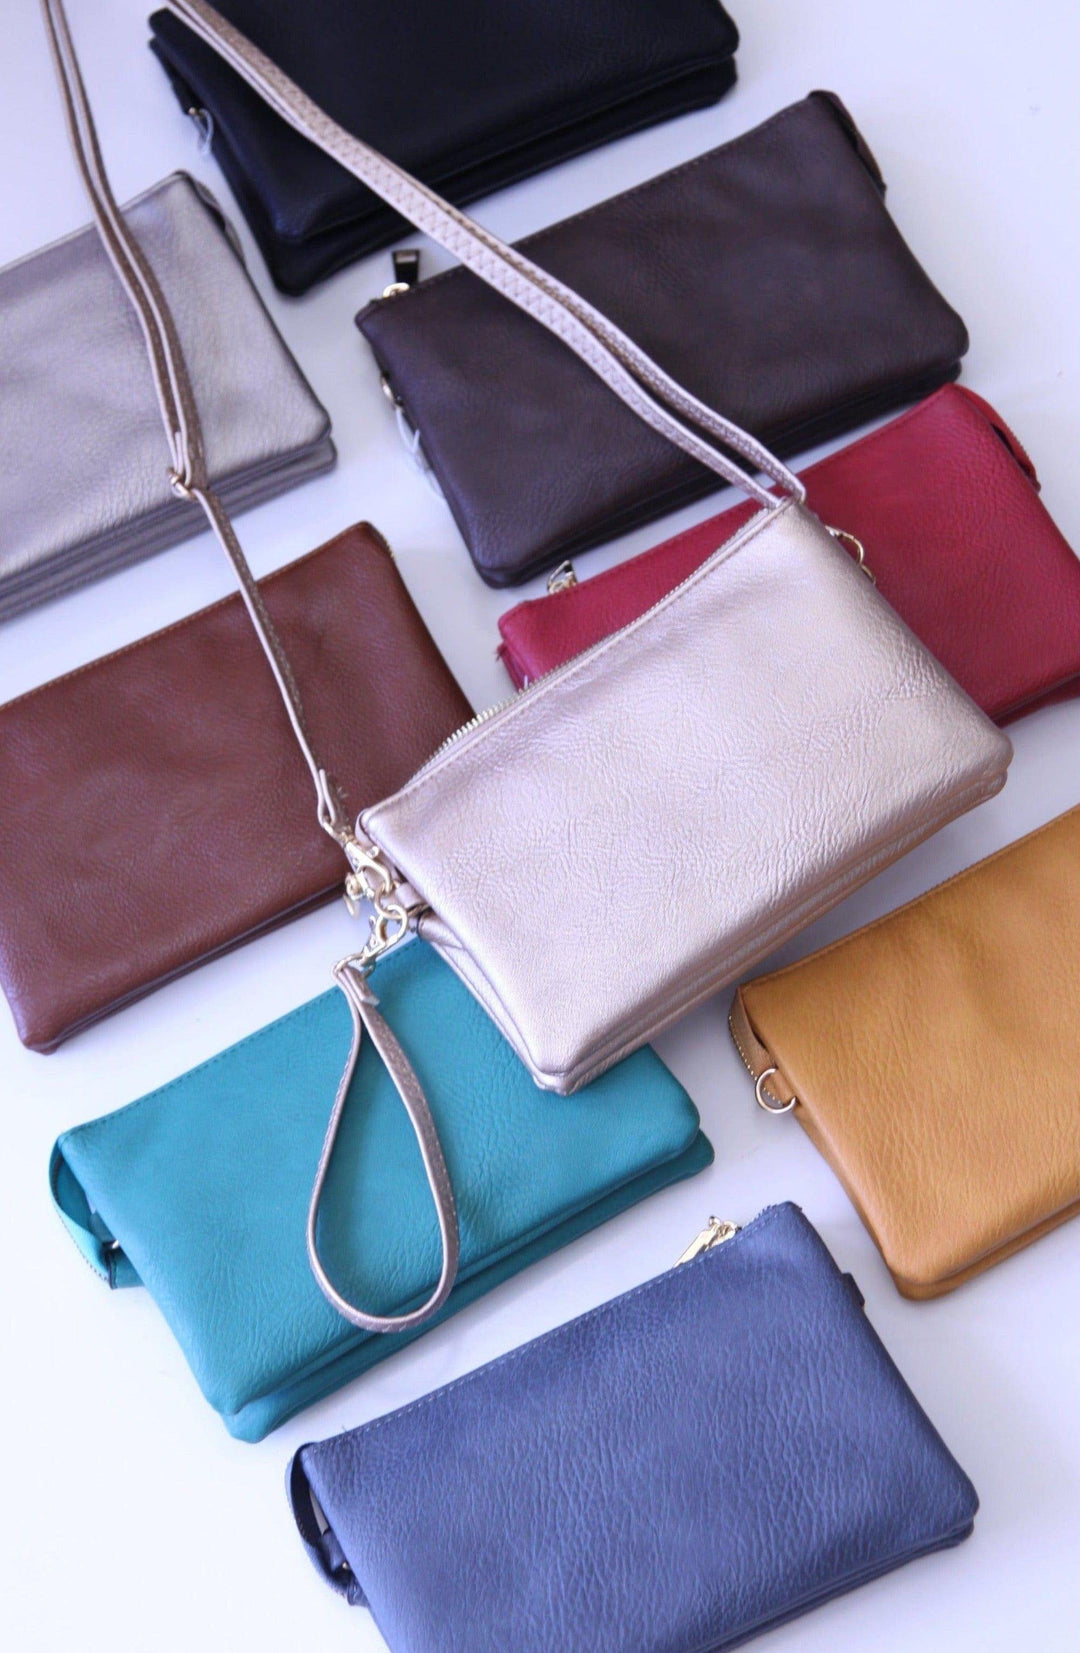 Example of the cross body and wristlet included with this versatile purse